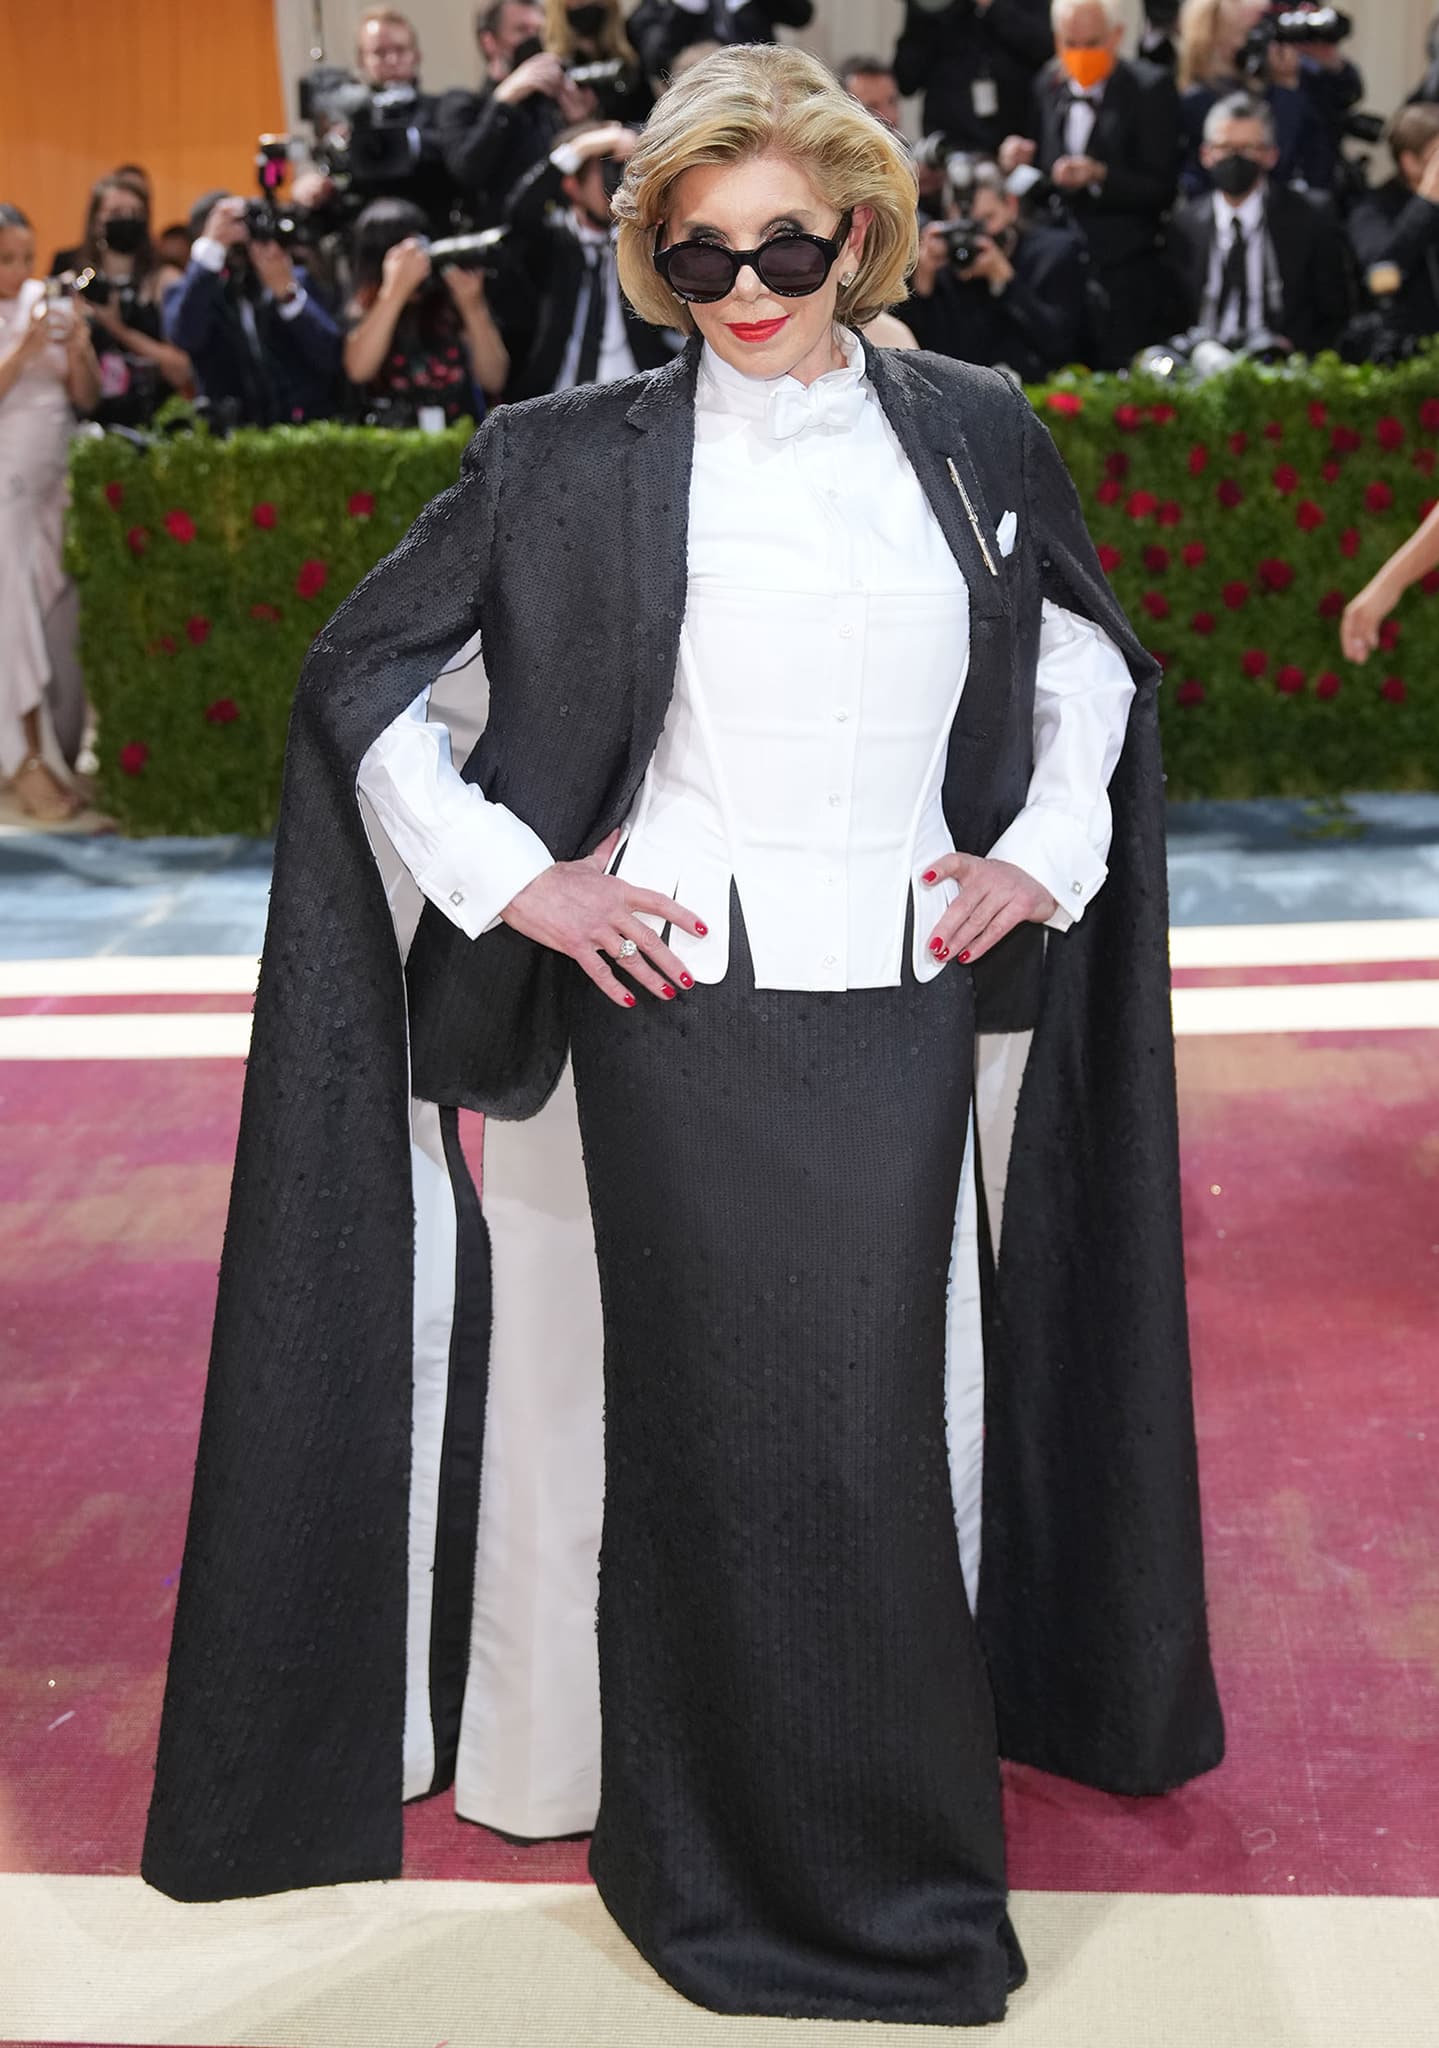 Christine Baranski in Thom Browne's white pique corset, matte black sequined cape jacket, and matching skirt